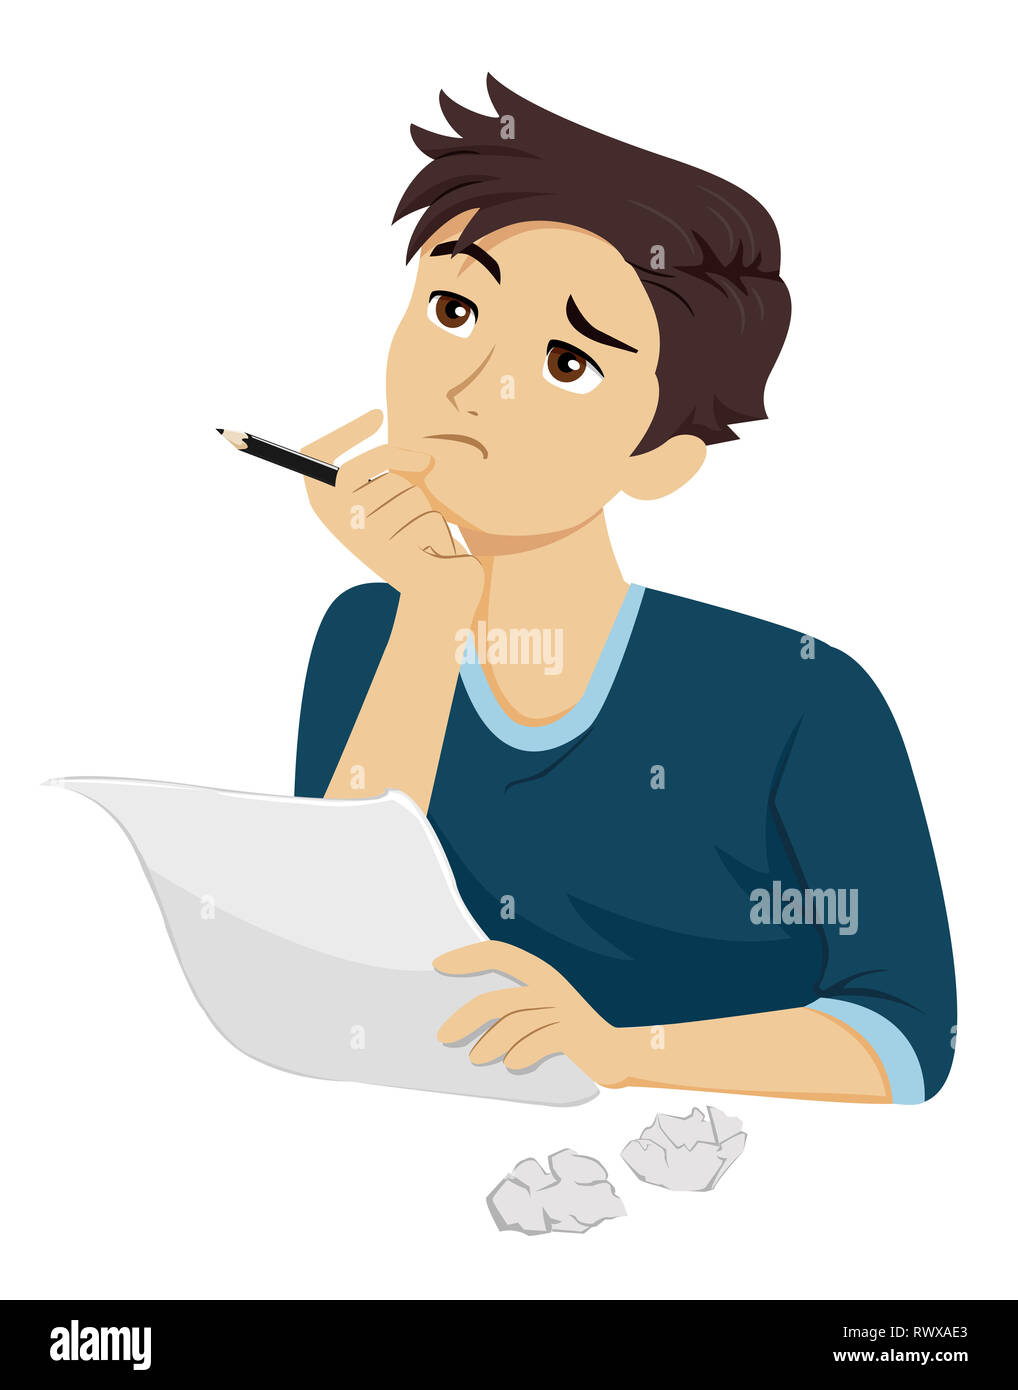 Illustration of a Teenage Guy Holding Pen and Paper Thinking of